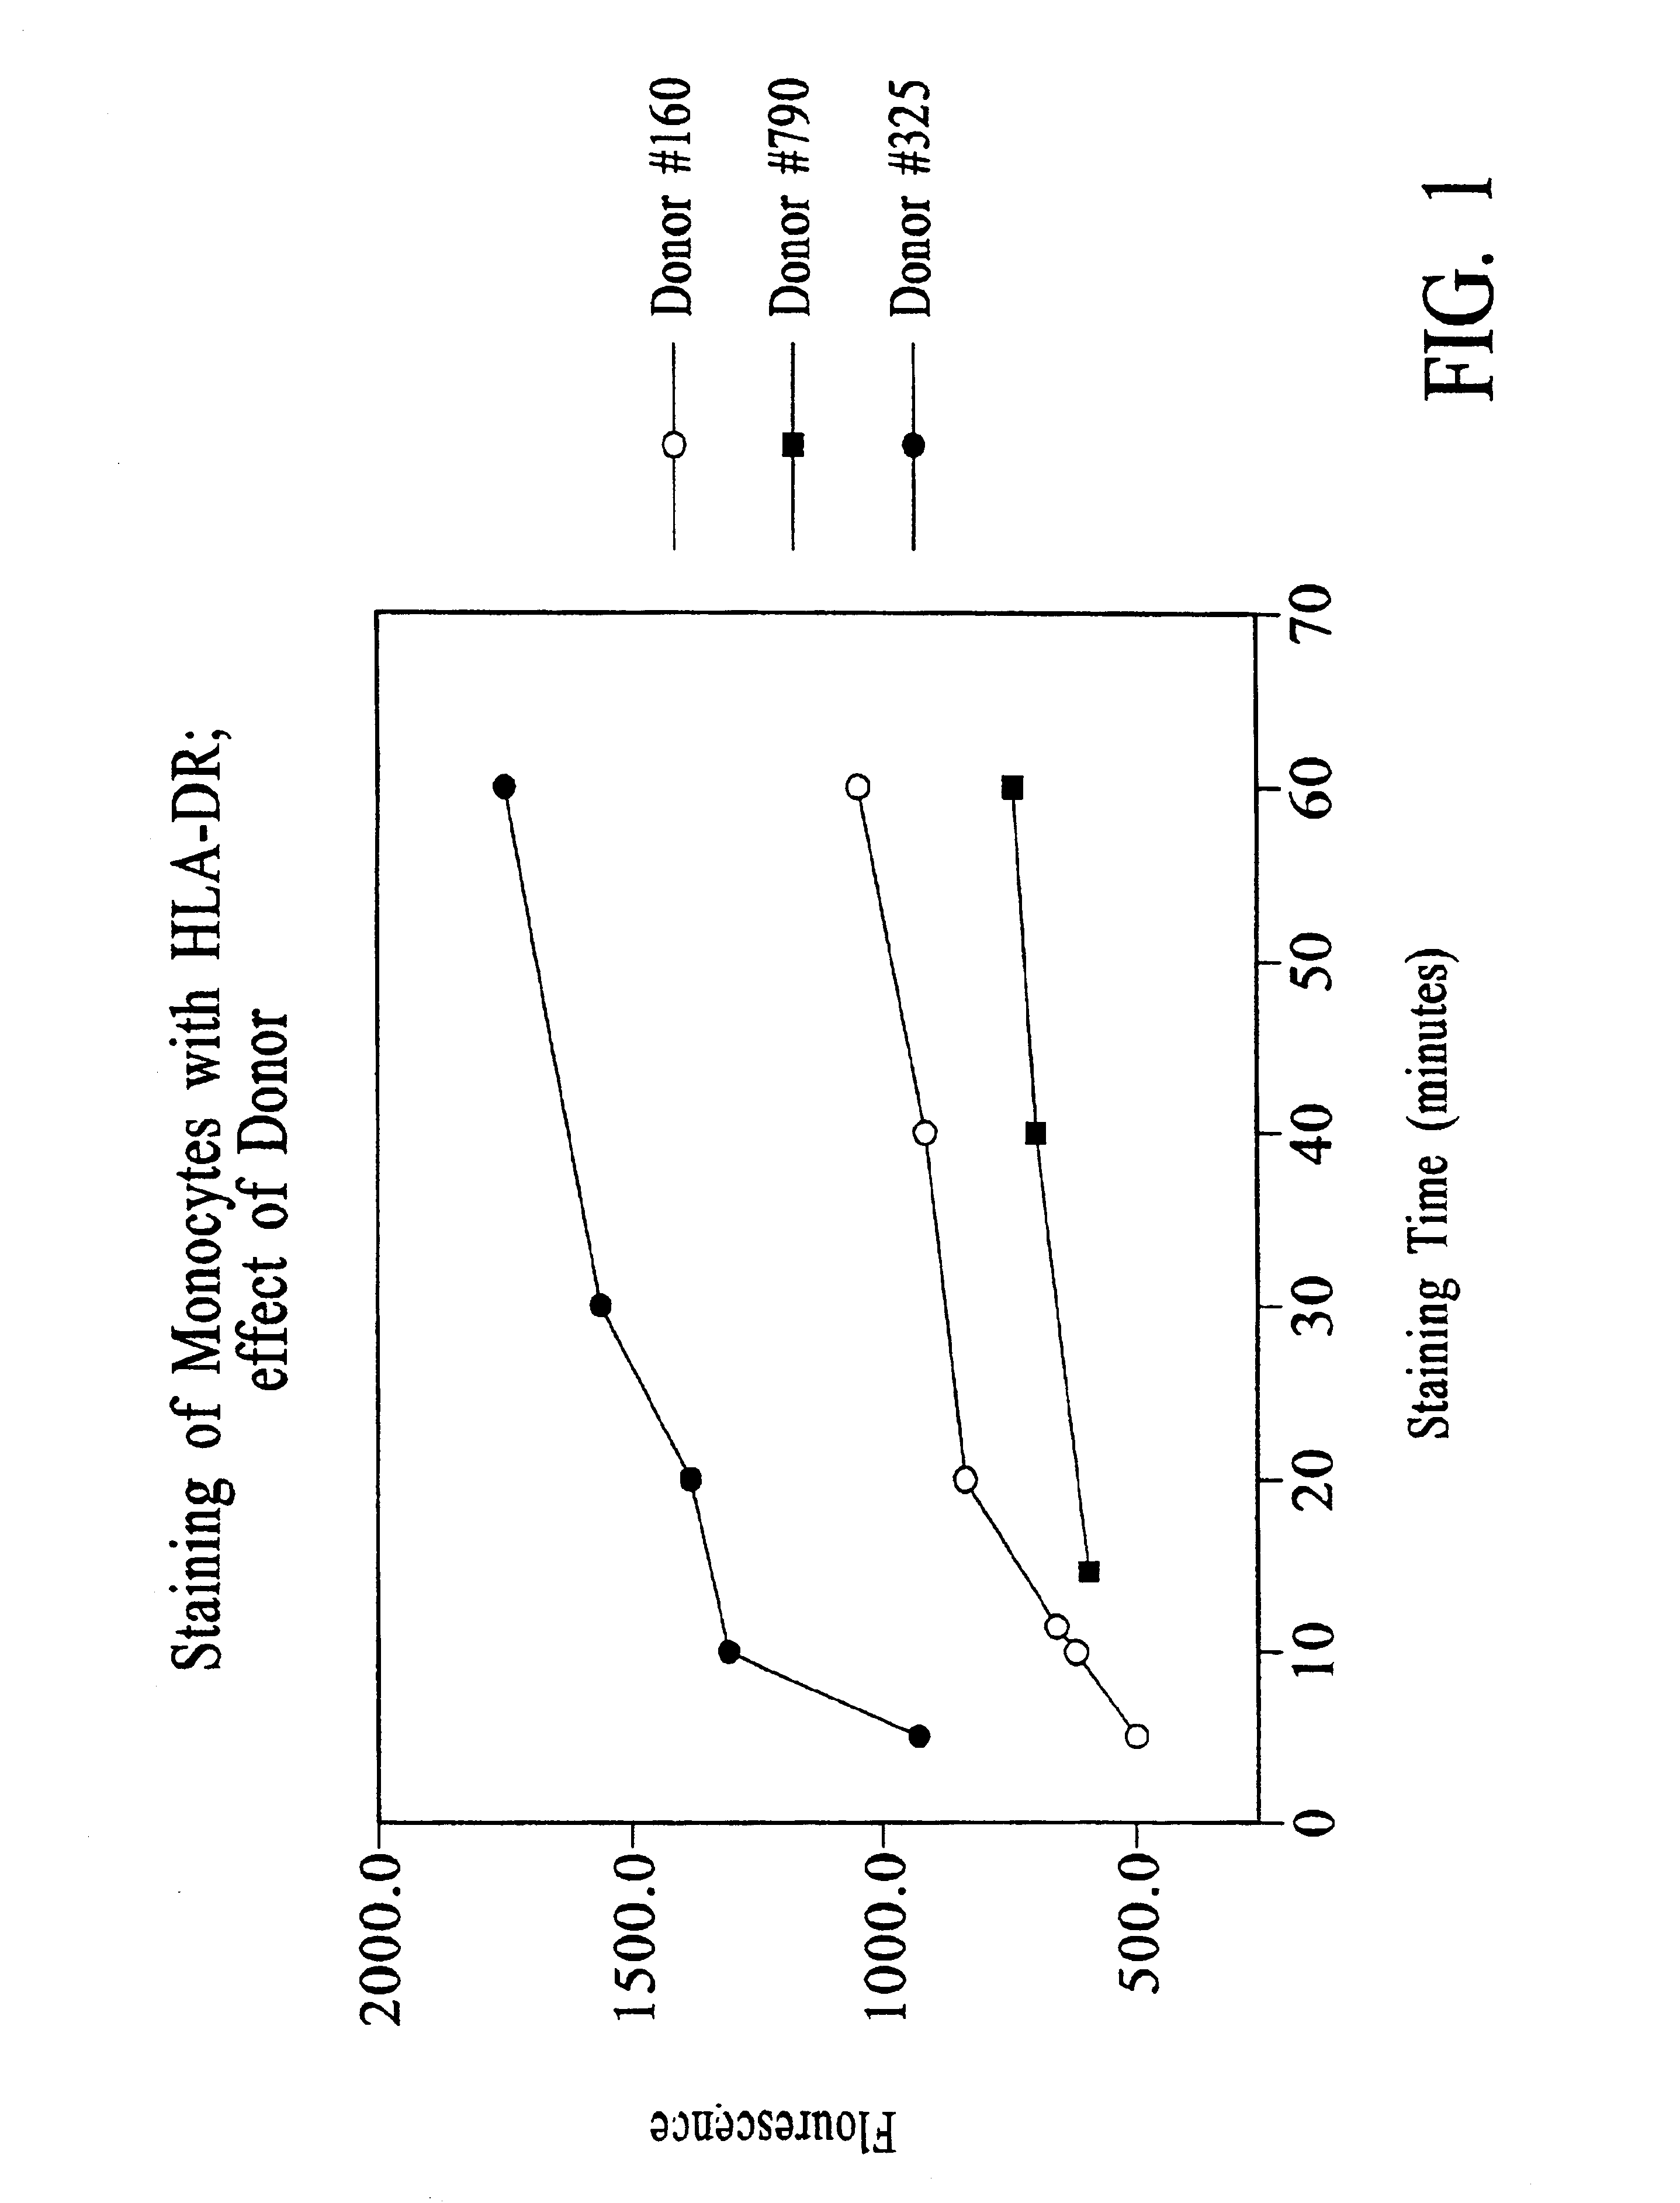 Methods and reagents for quantitation of cell-surface molecule expression on peripheral blood cells